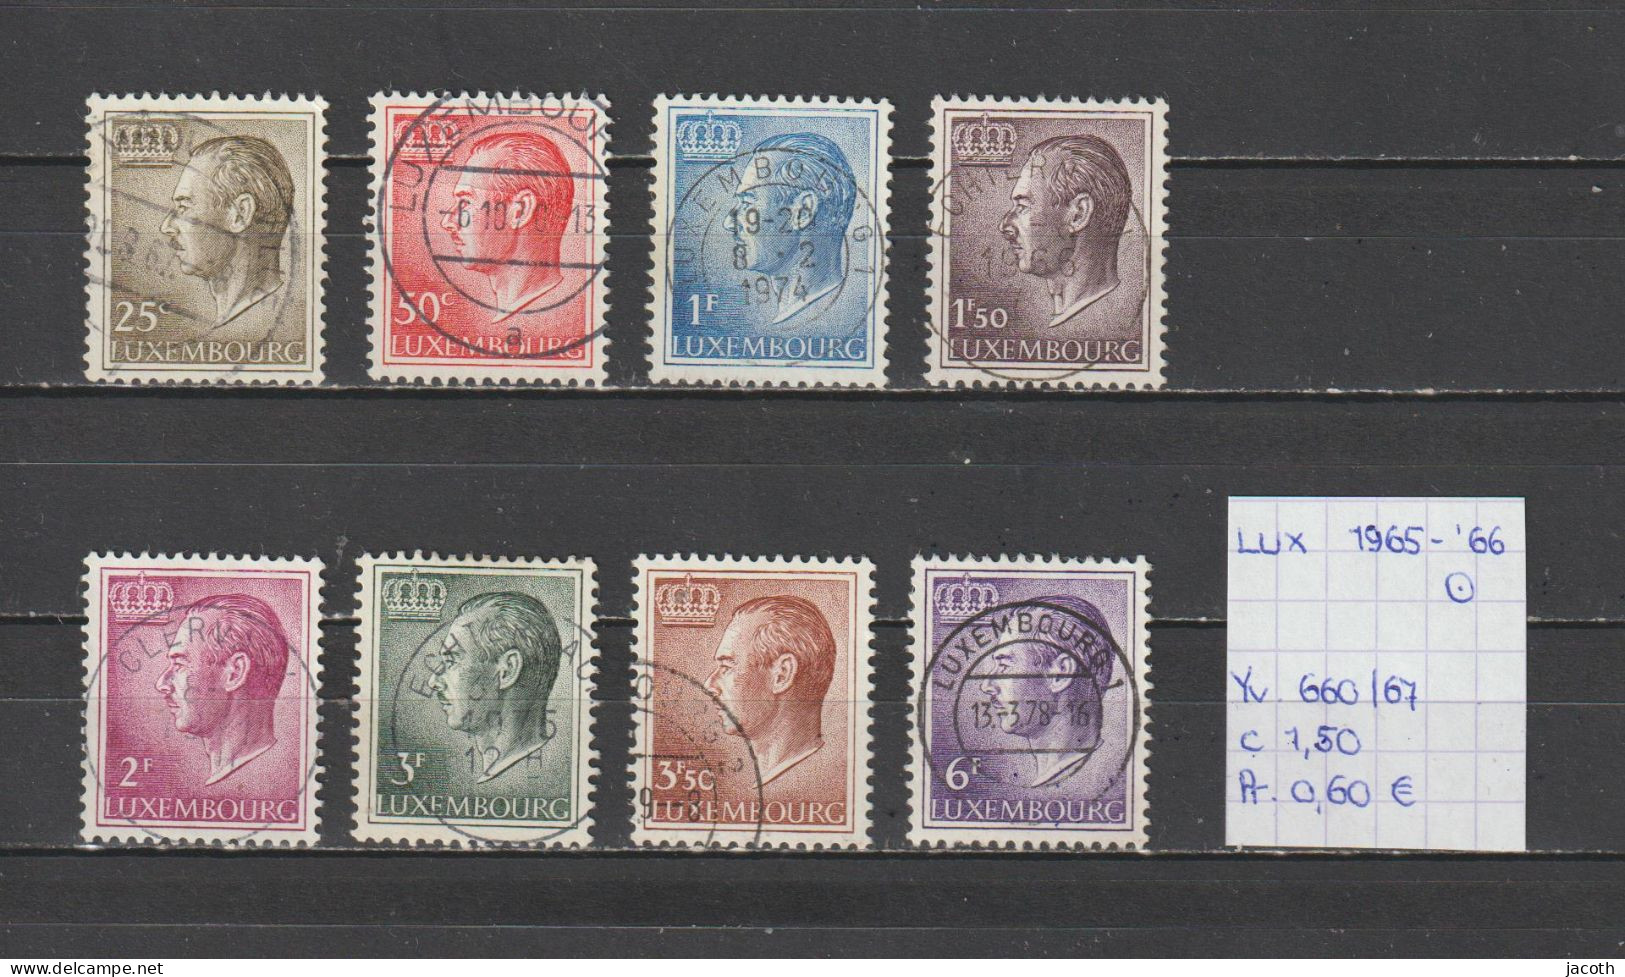 (TJ) Luxembourg 1965-'66 - YT 660/67 (gest./obl./used) - Usados